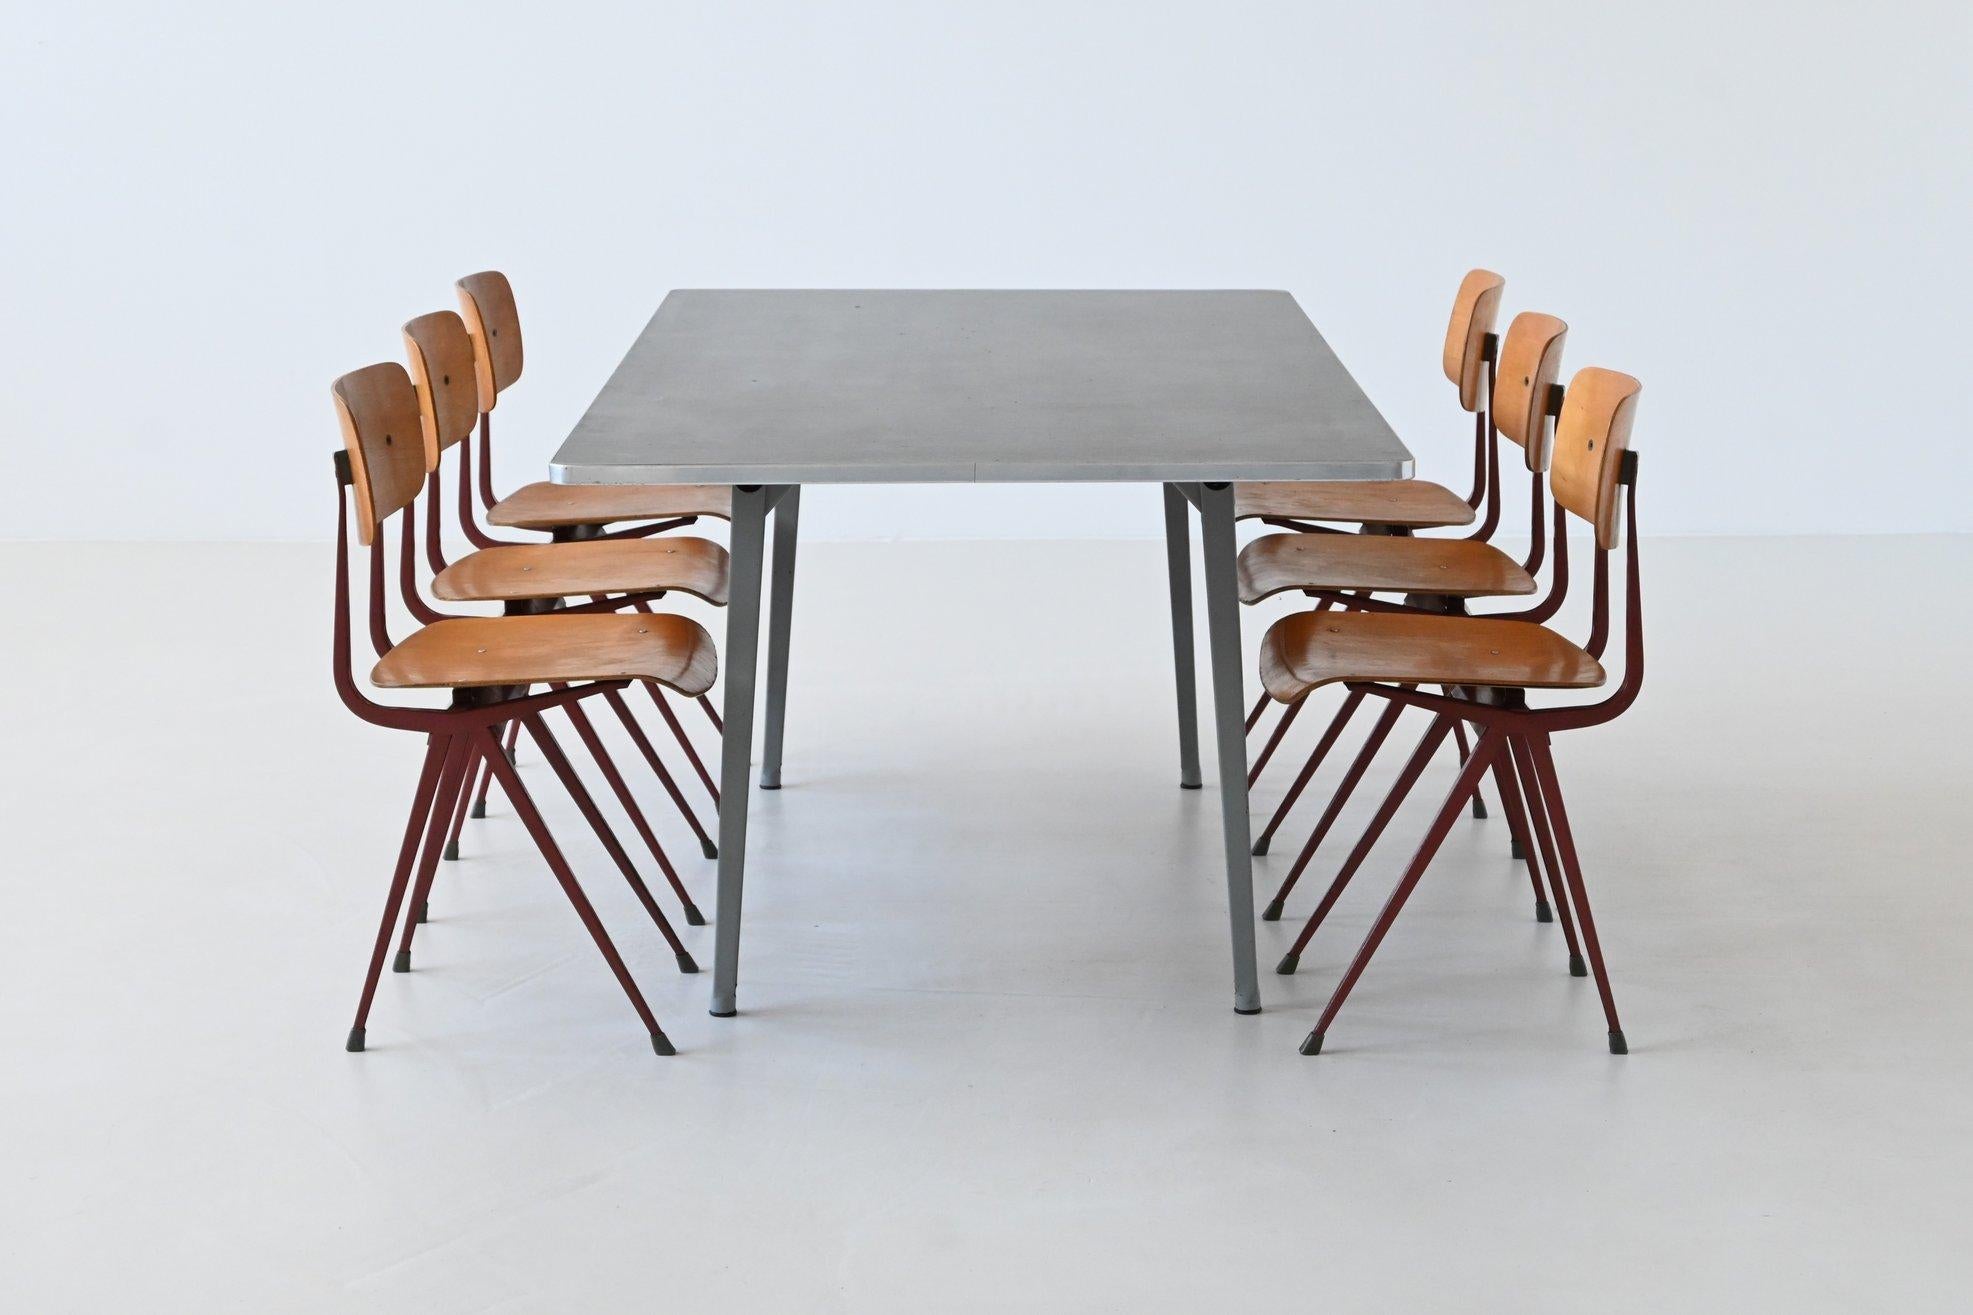 Very nice industrial “Reform” table designed by Friso Kramer for Ahrend de Cirkel, The Netherlands 1955. The Reform series contained a lot of variety of tables in different sizes and editions to the client’s needs. This table has a rectangular